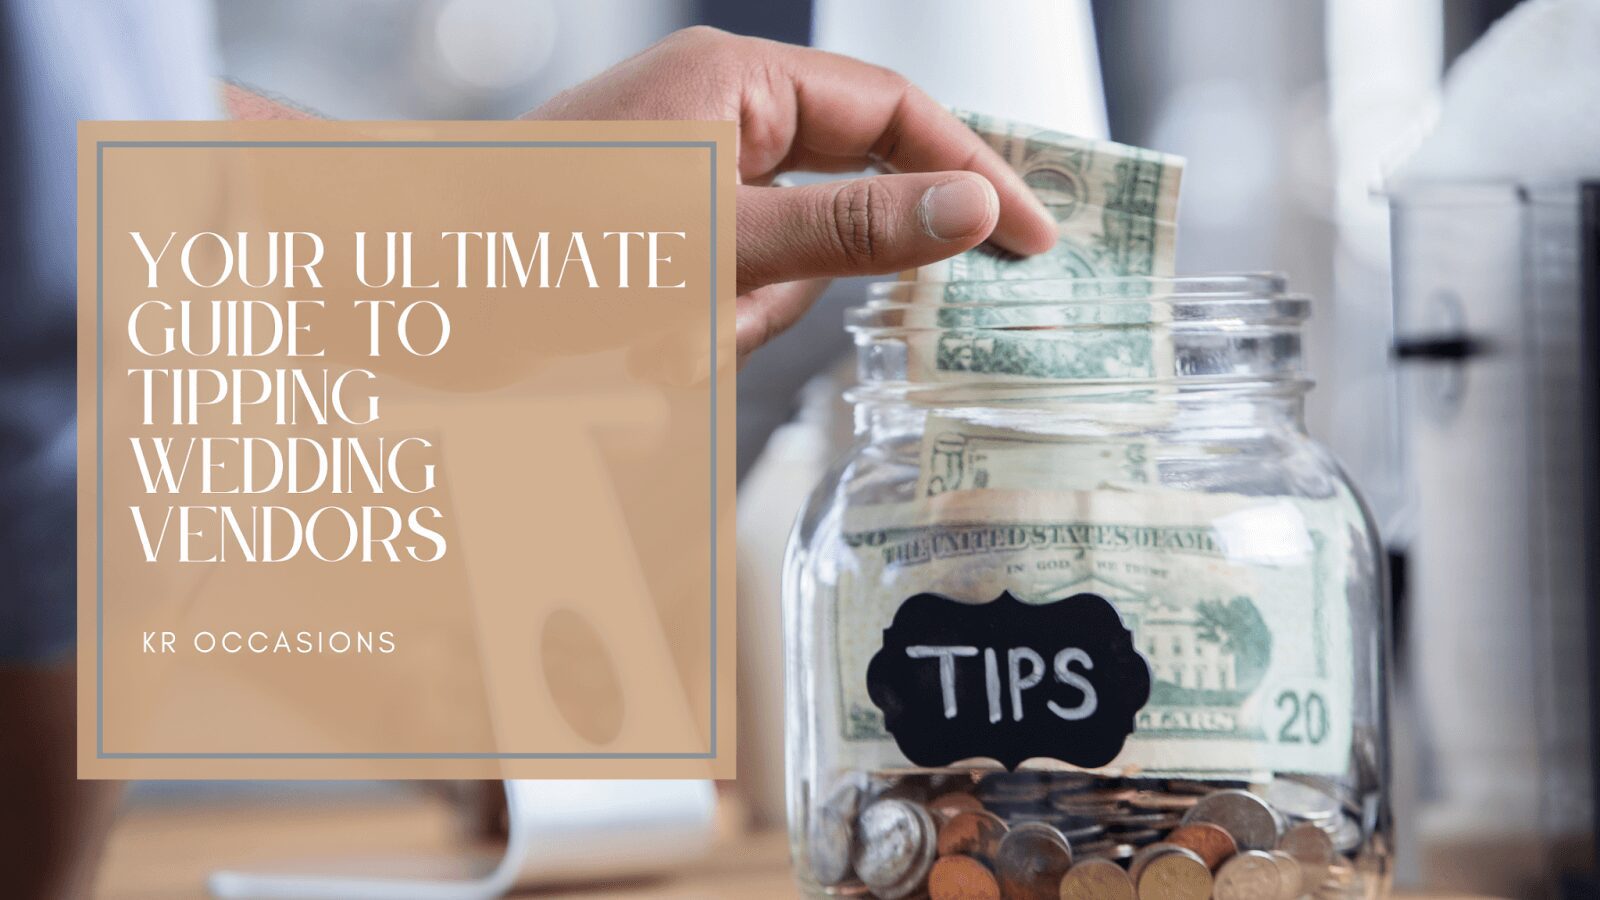 Your Ultimate Guide to Tipping Wedding Vendors